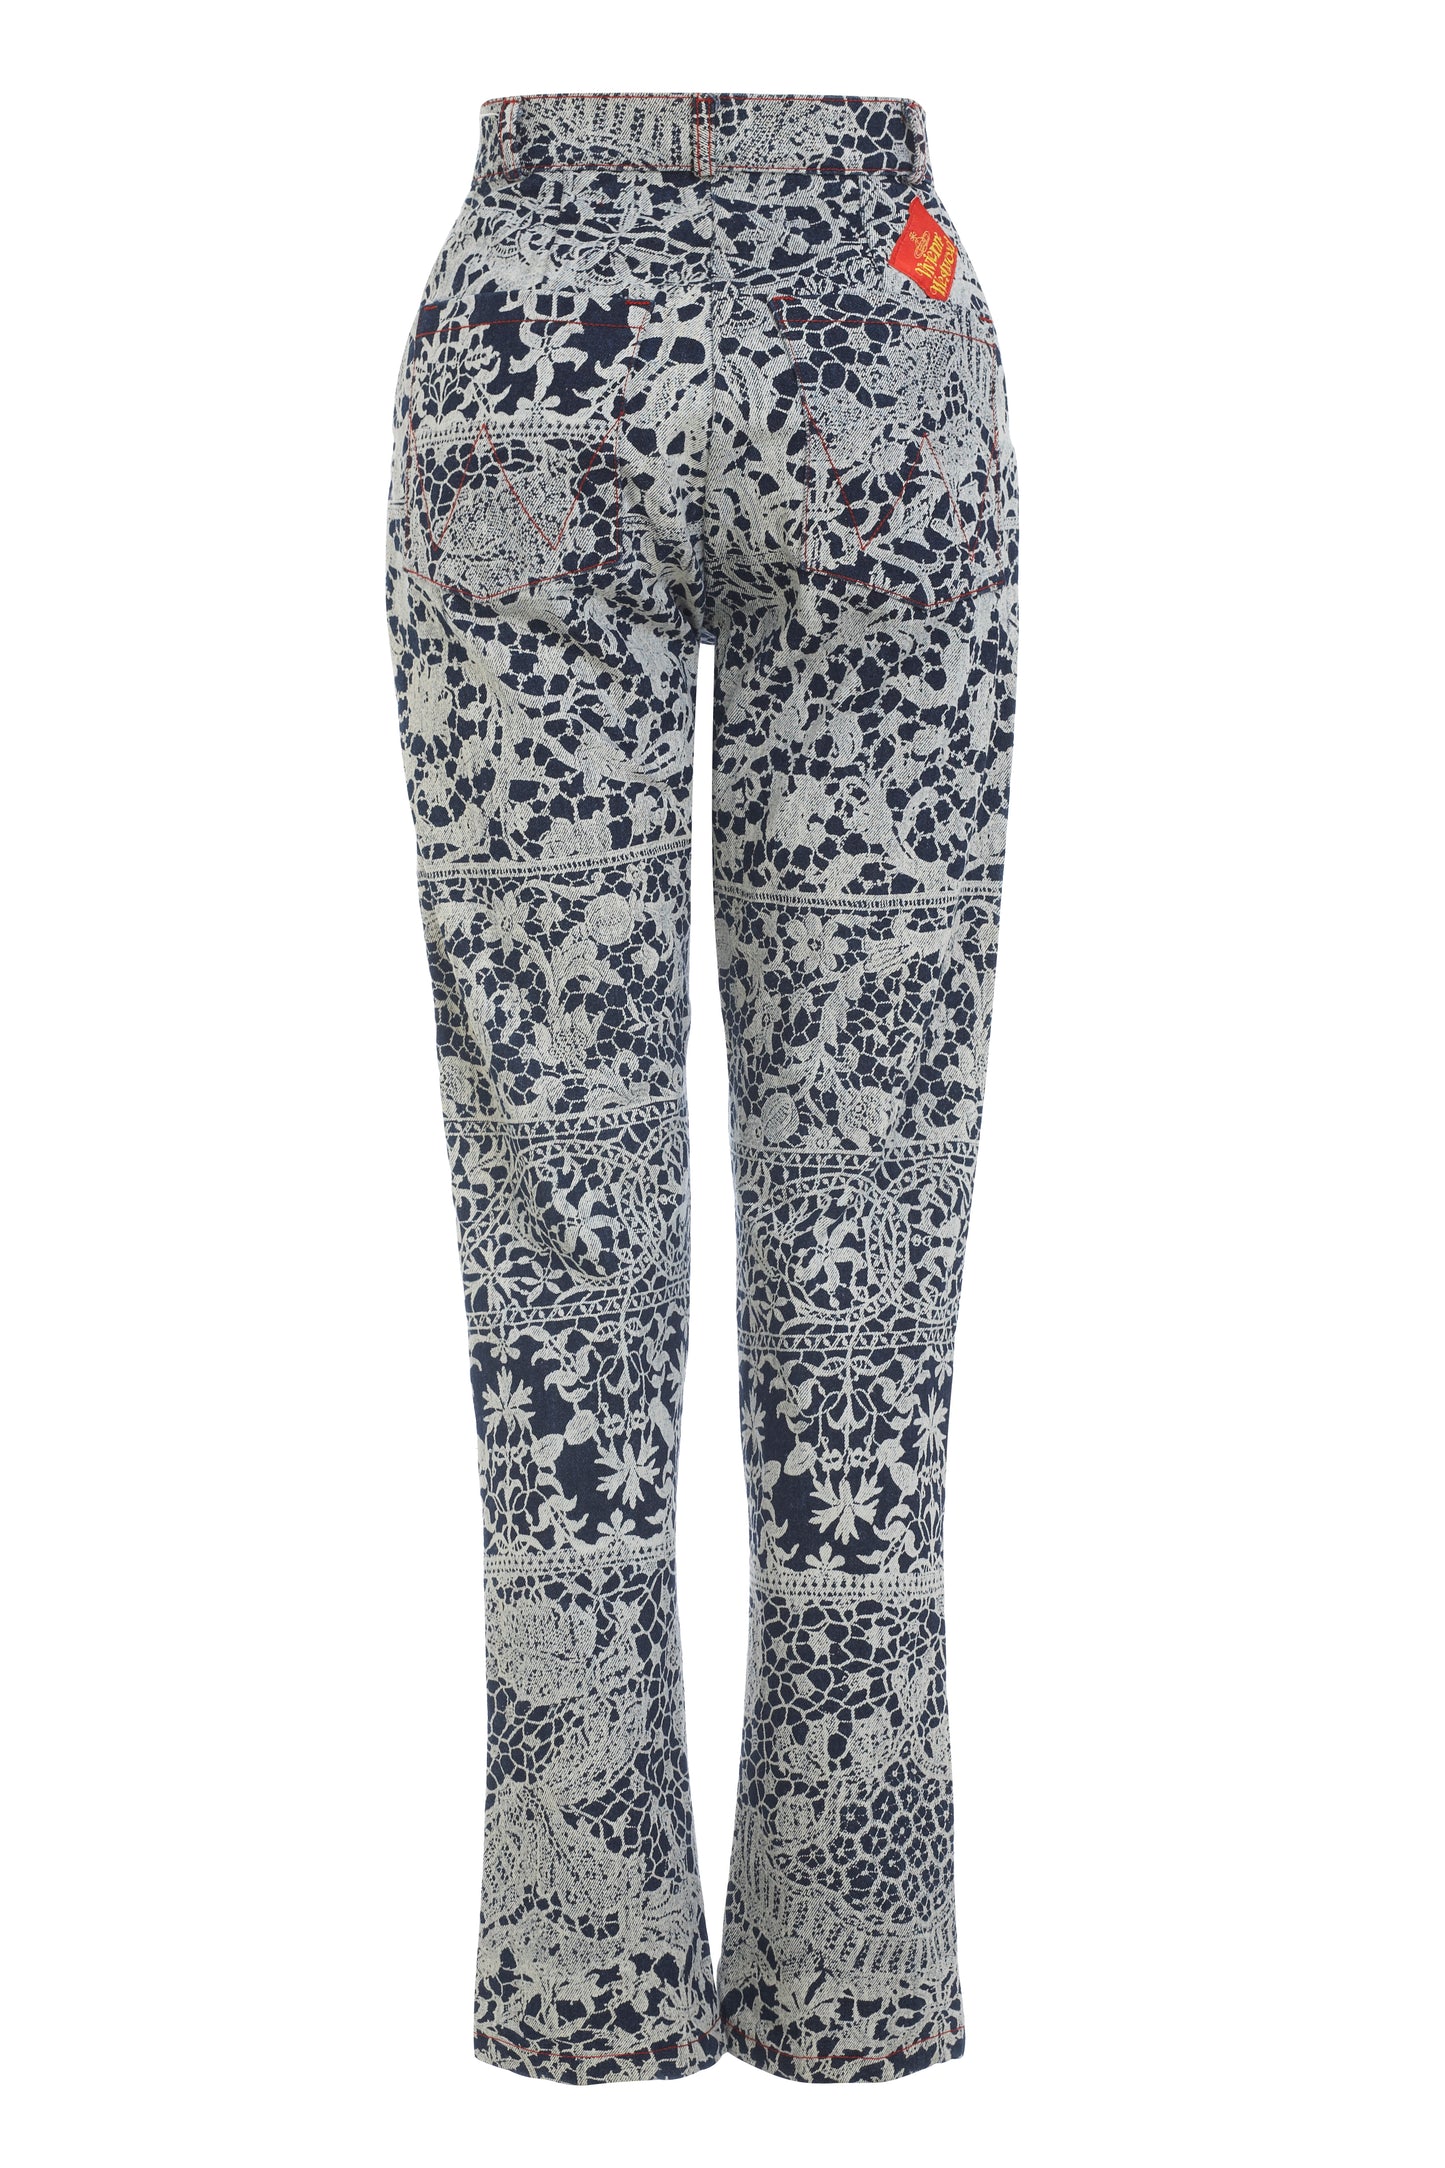 Vivienne Westwood denim jeans with blue and white pattern